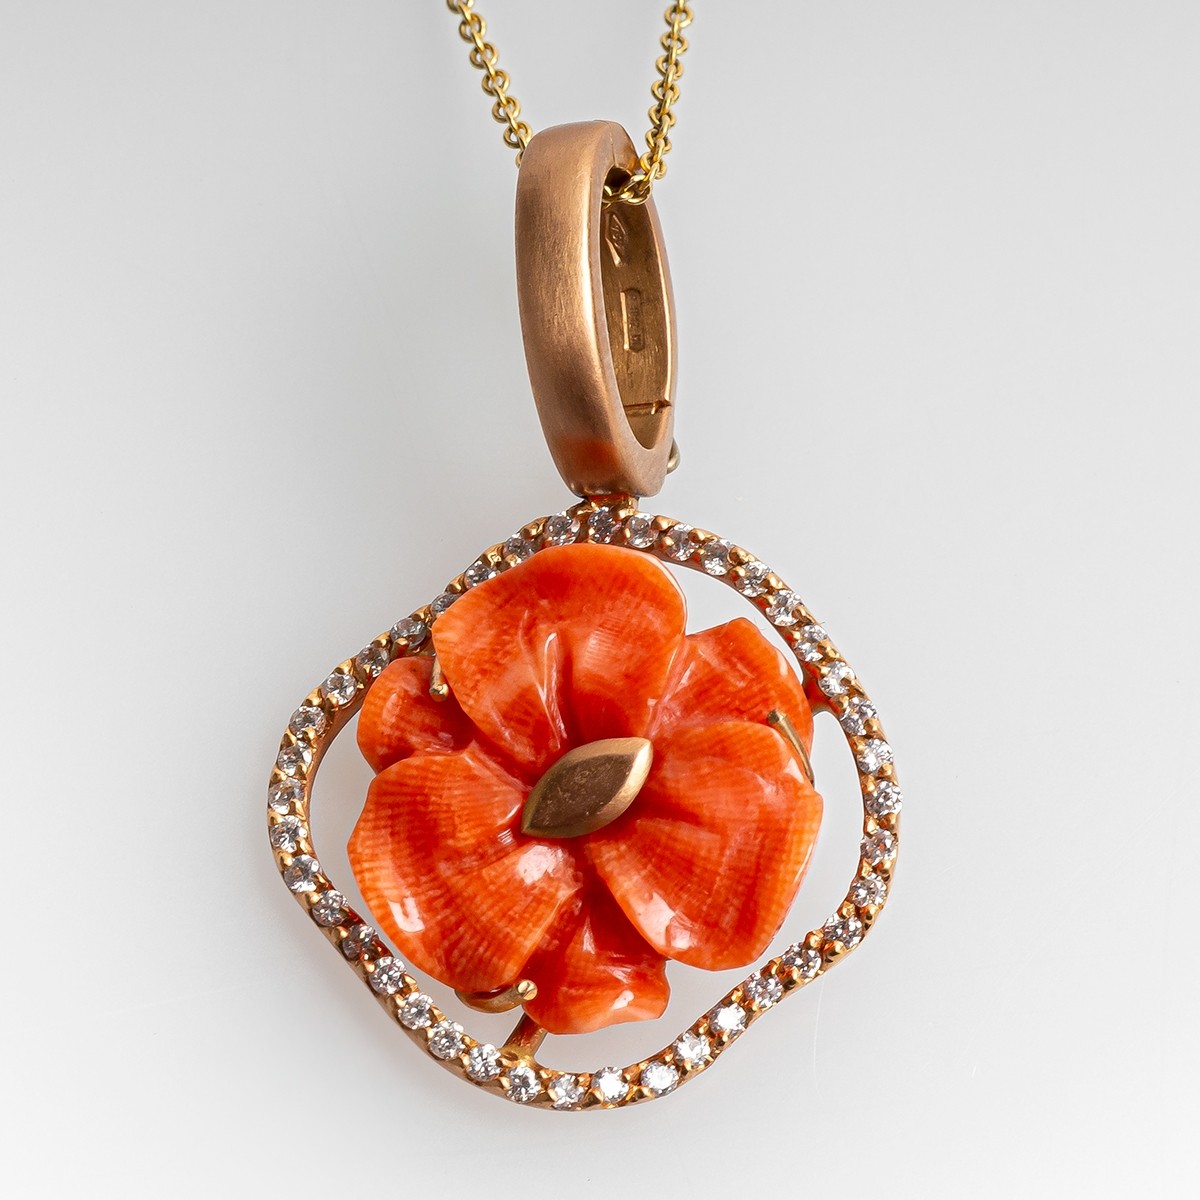 Rosso Corallo • Antique Coral Necklace From Italy In Two Rows, Around 1900  • Hofer Antikschmuck